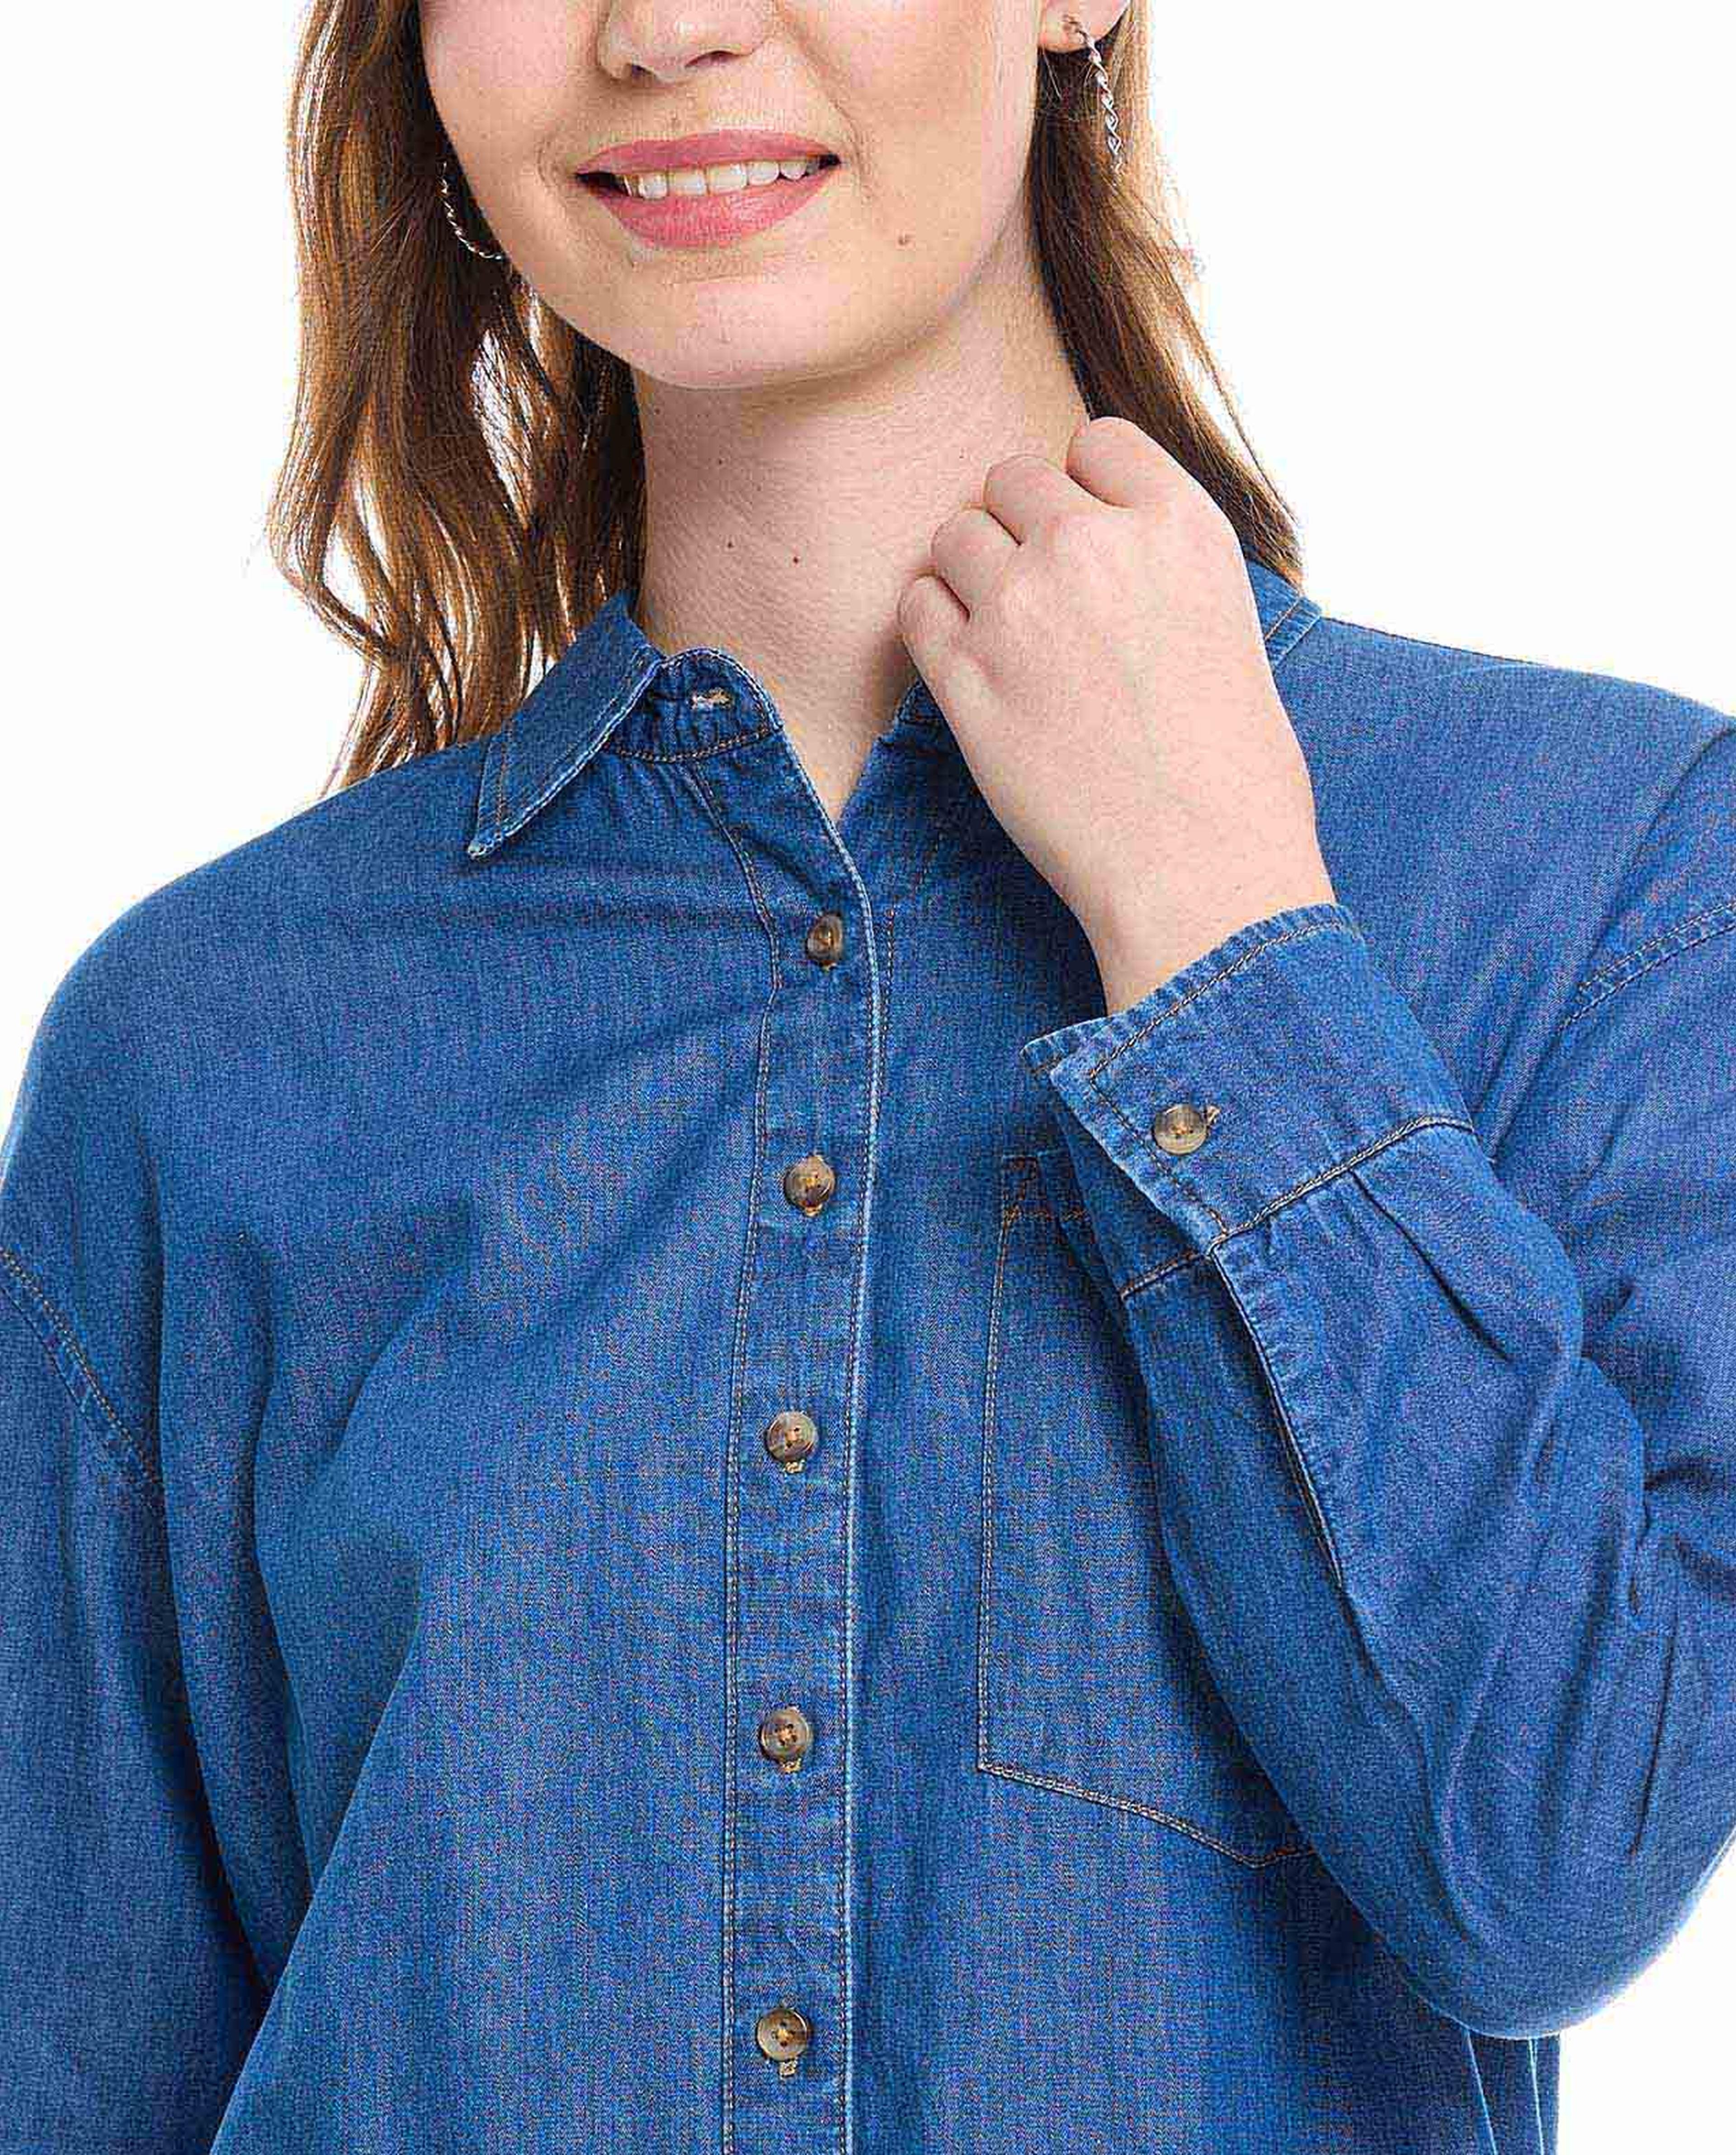 Denim Shirt with Classic Collar and Long Sleeves